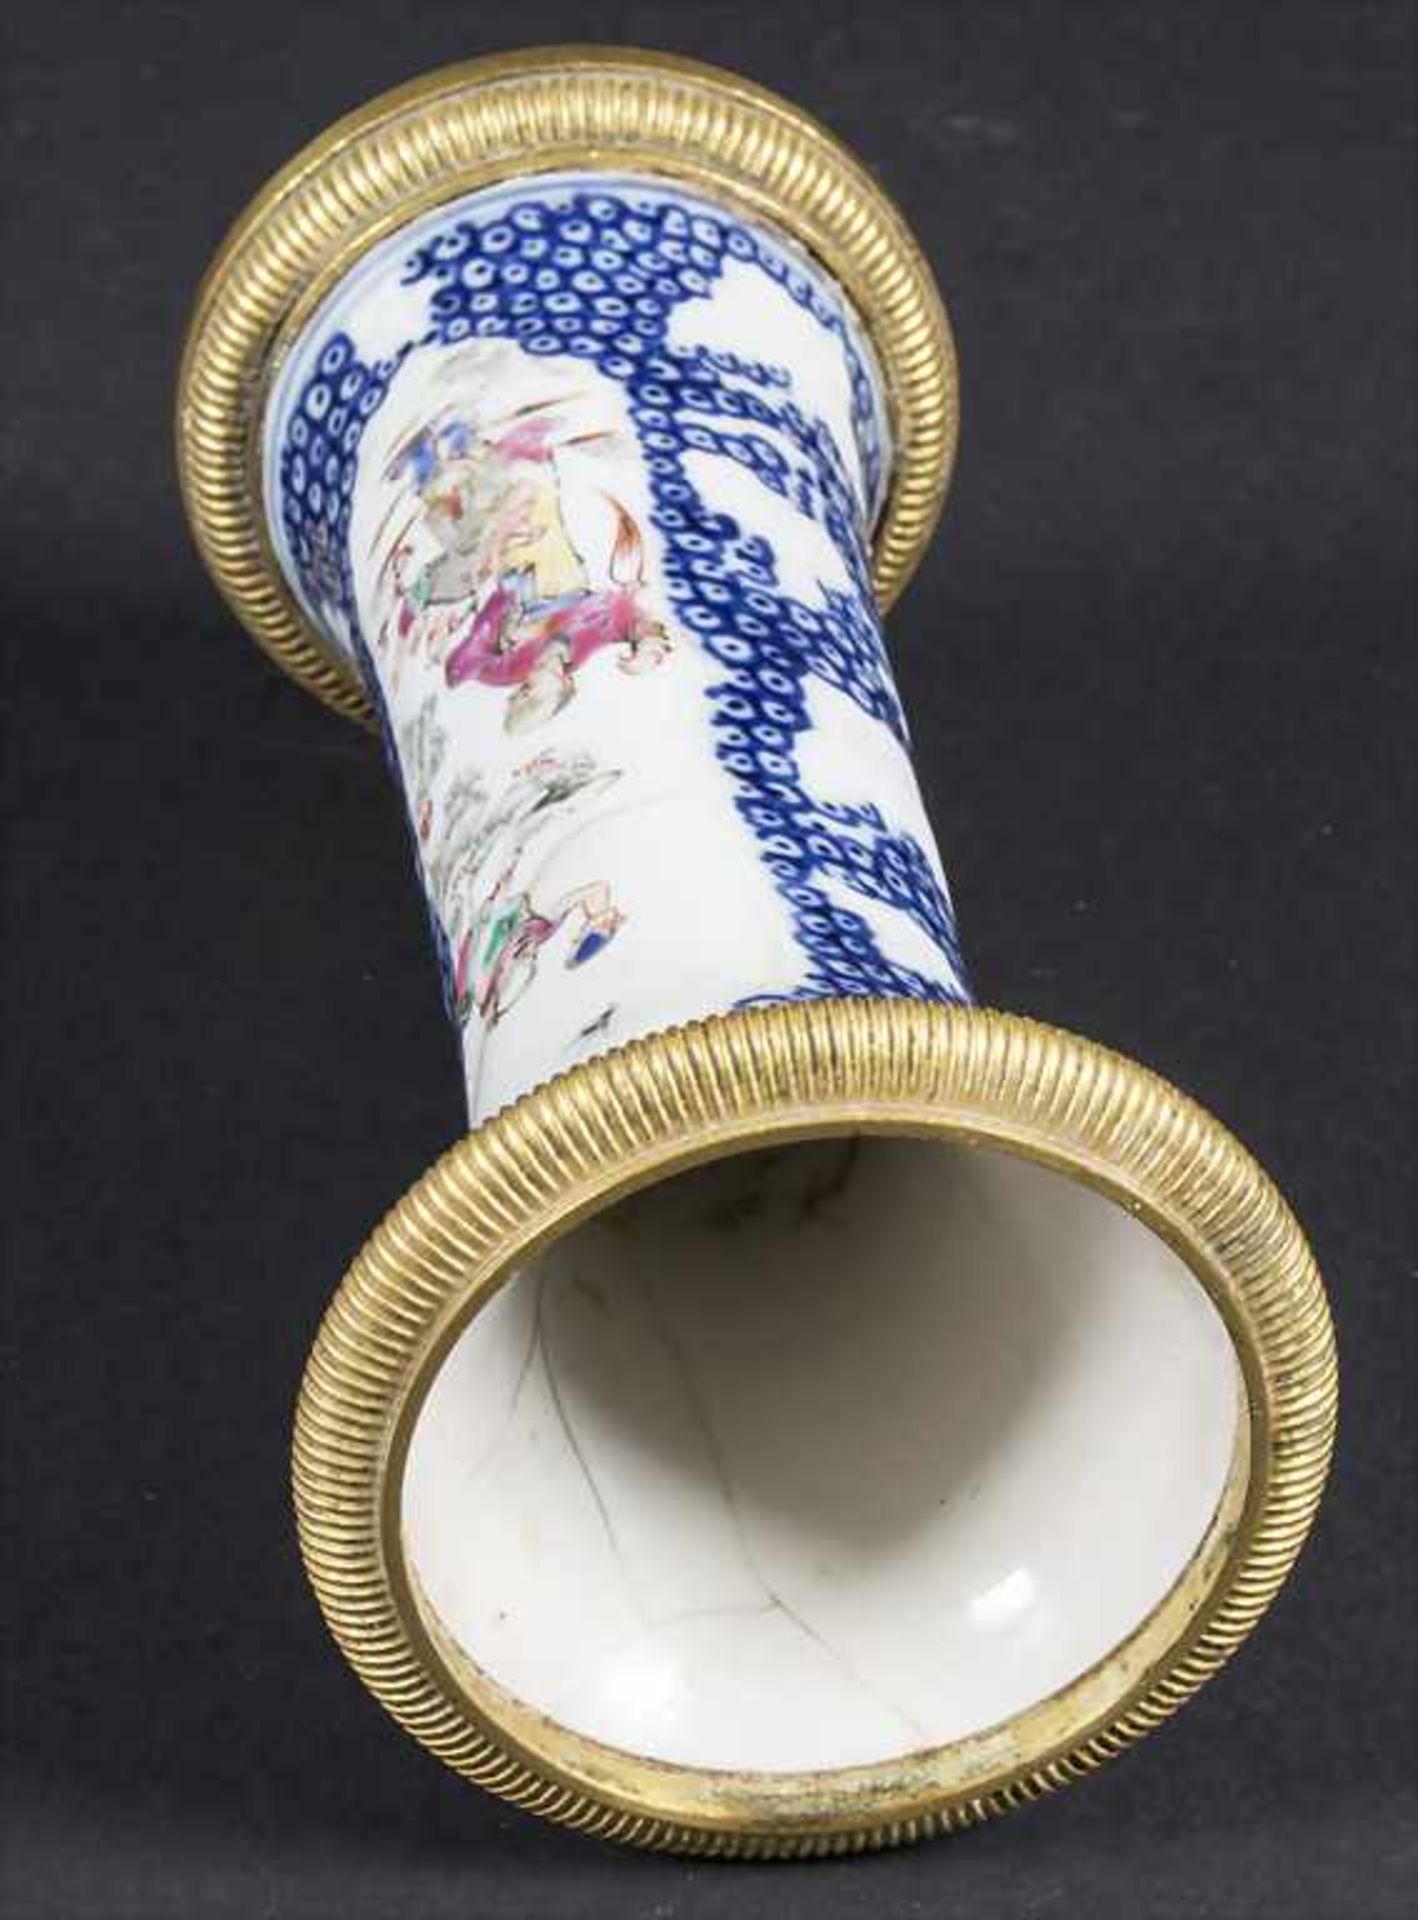 Ziervase / A decorative porcelain vase, China, Qing Dynastie (1644-1911), 18. Jh.Mater - Image 5 of 9